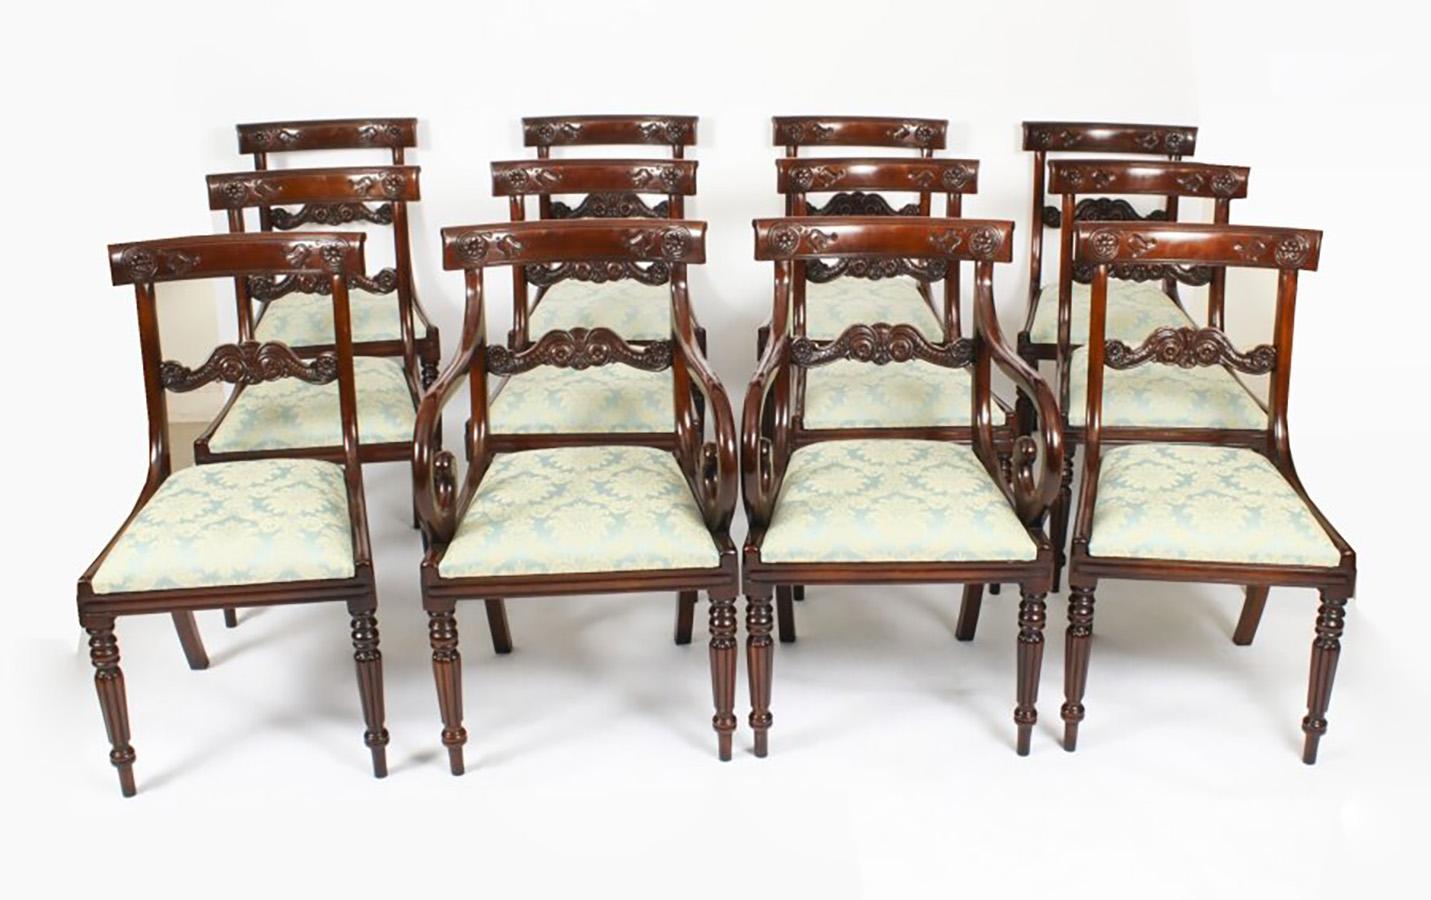 Antique Regency Concertina Action Dining Table 19th C & 10 chairs For Sale 9